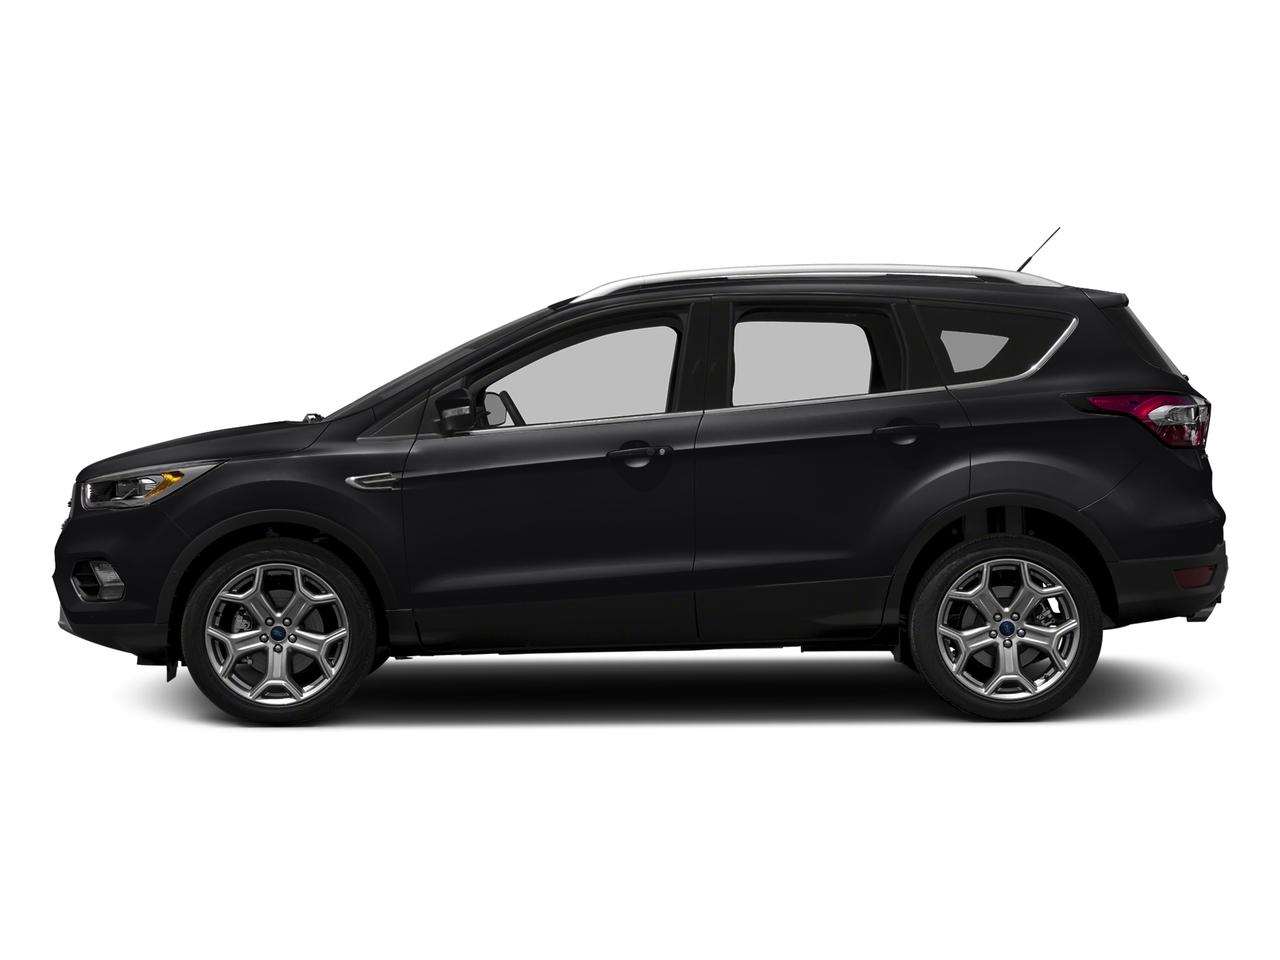 Used 2017 Ford Escape Titanium with VIN 1FMCU0JD3HUC31753 for sale in Goldsboro, NC